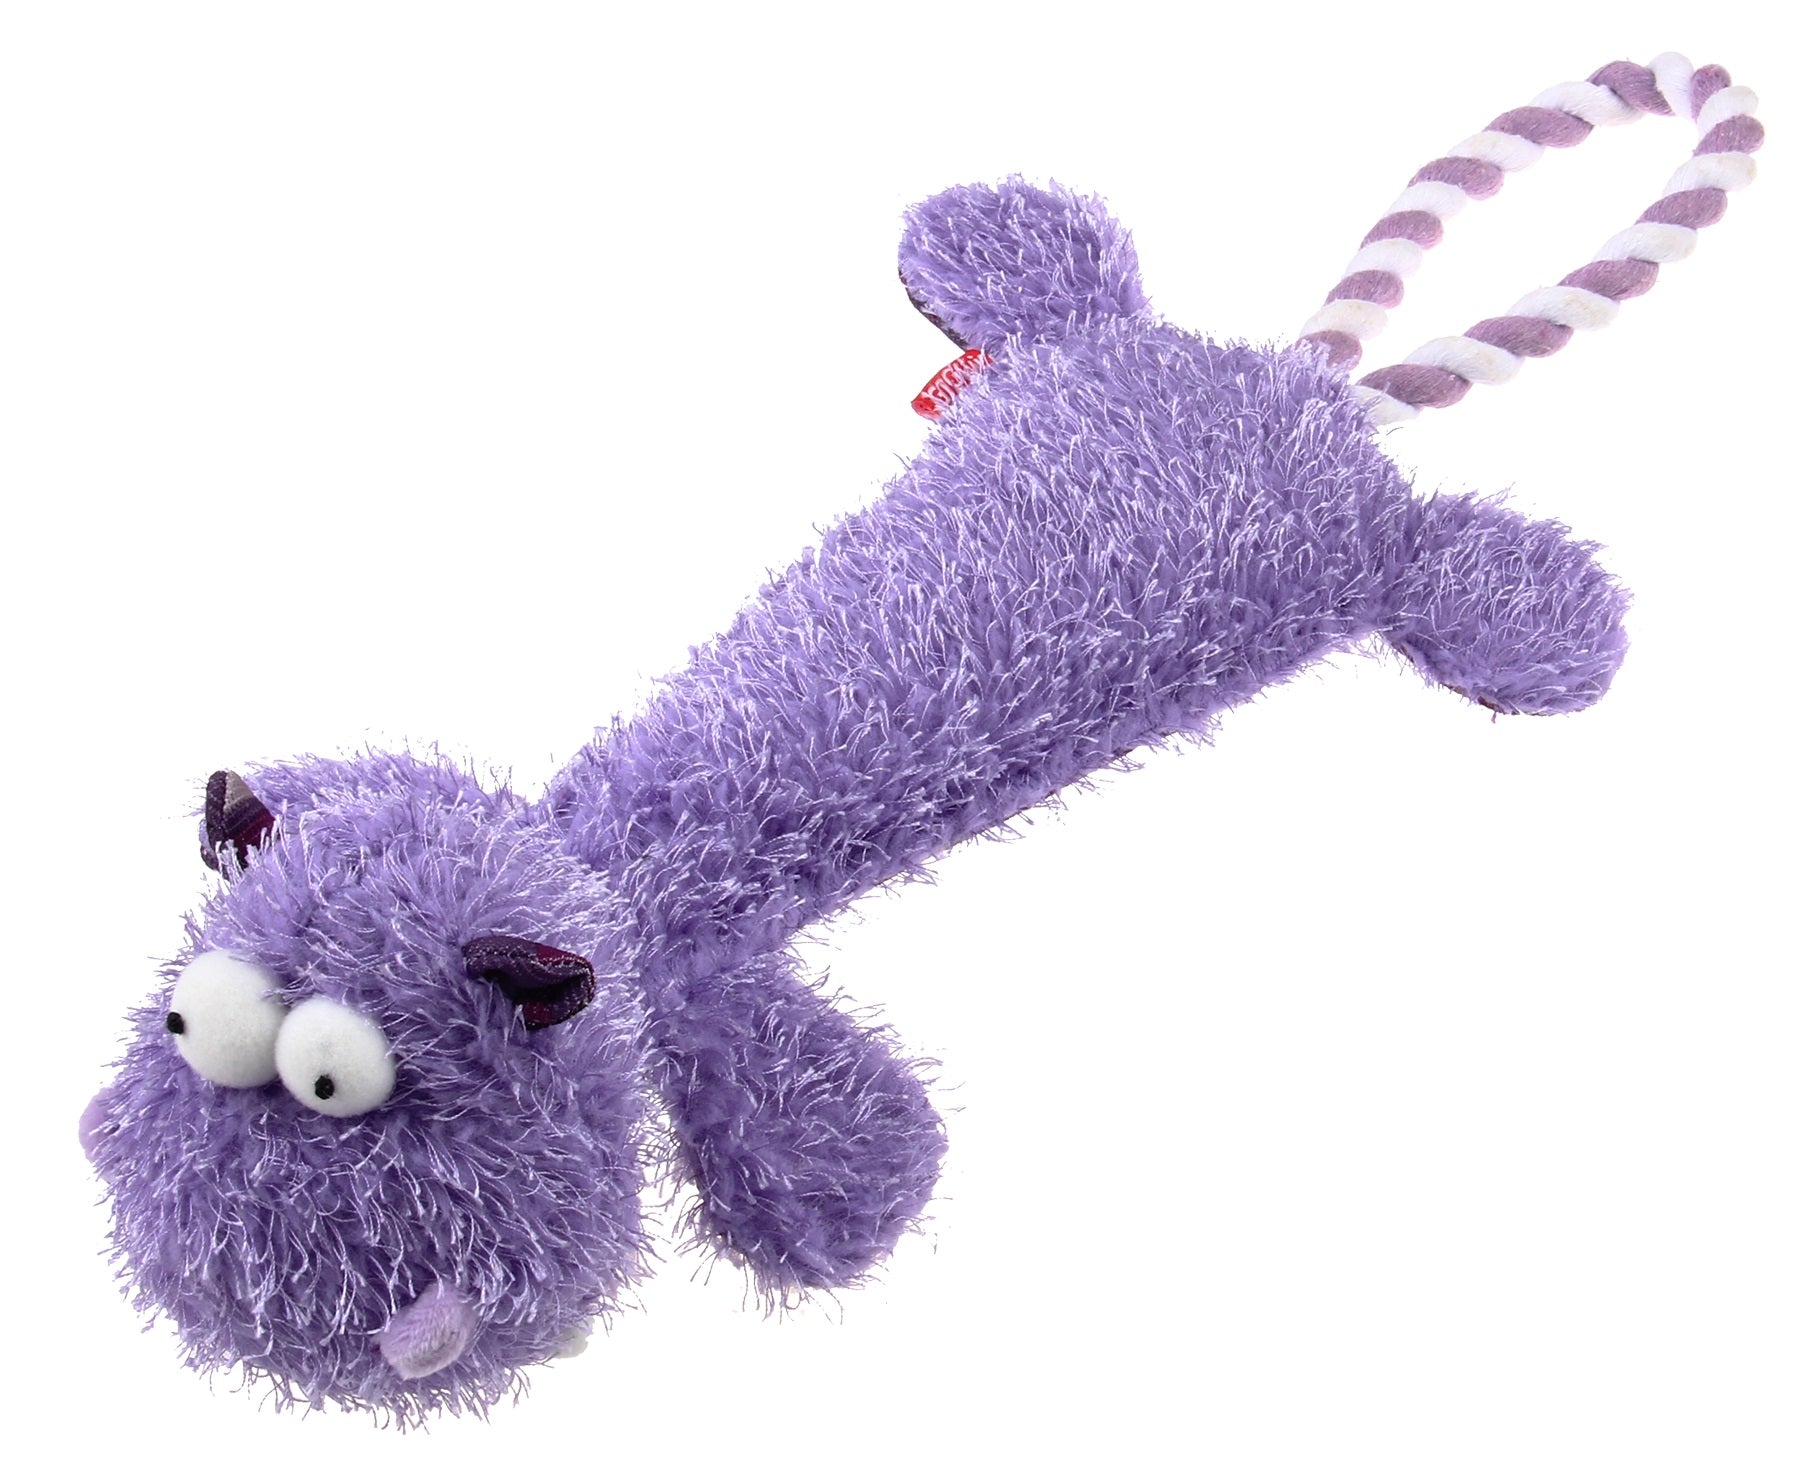 Gigwi 'Plush Friendz' Durable Hippo With Squeaker Dog Toy - Purple